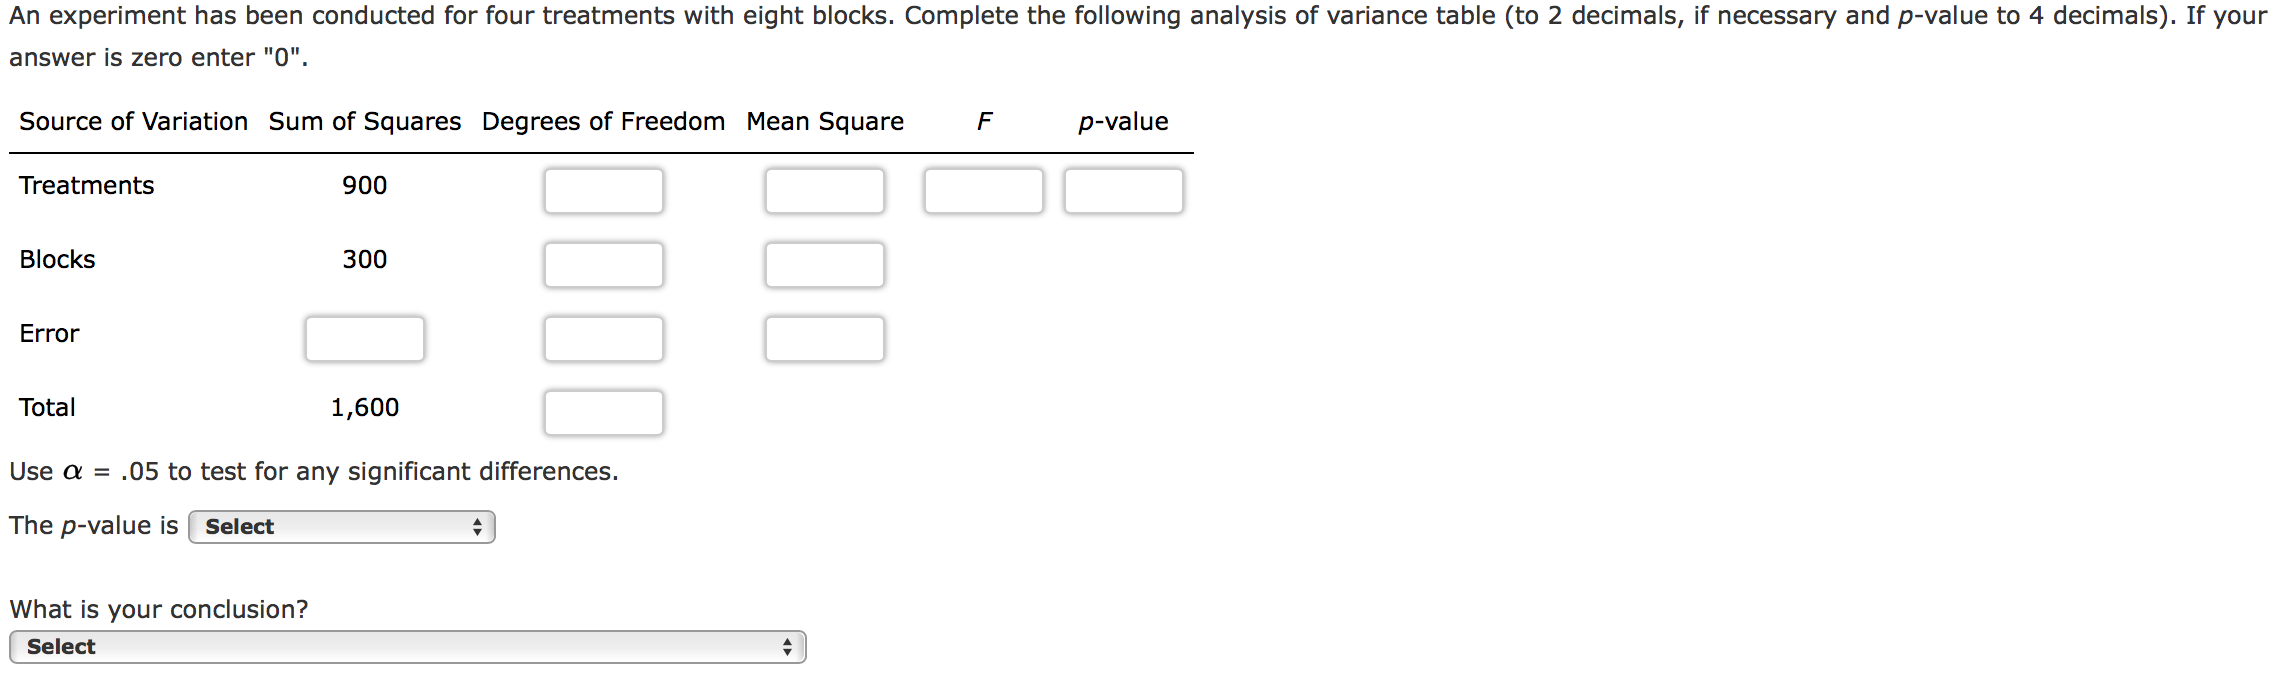 An experiment has been conducted for four treatments with eight blocks. Complete the following analysis of variance table (to 2 decimals, if necessary and p-value to 4 decimals). If your
answer is zero enter "0".
Source of Variation Sum of Squares Degrees of Freedom Mean Square
p-value
Treatments
900
Blocks
300
Error
Total
1,600
Use a = .05 to test for any significant differences.
The p-value is
Select
What is your conclusion?
Select
0000
